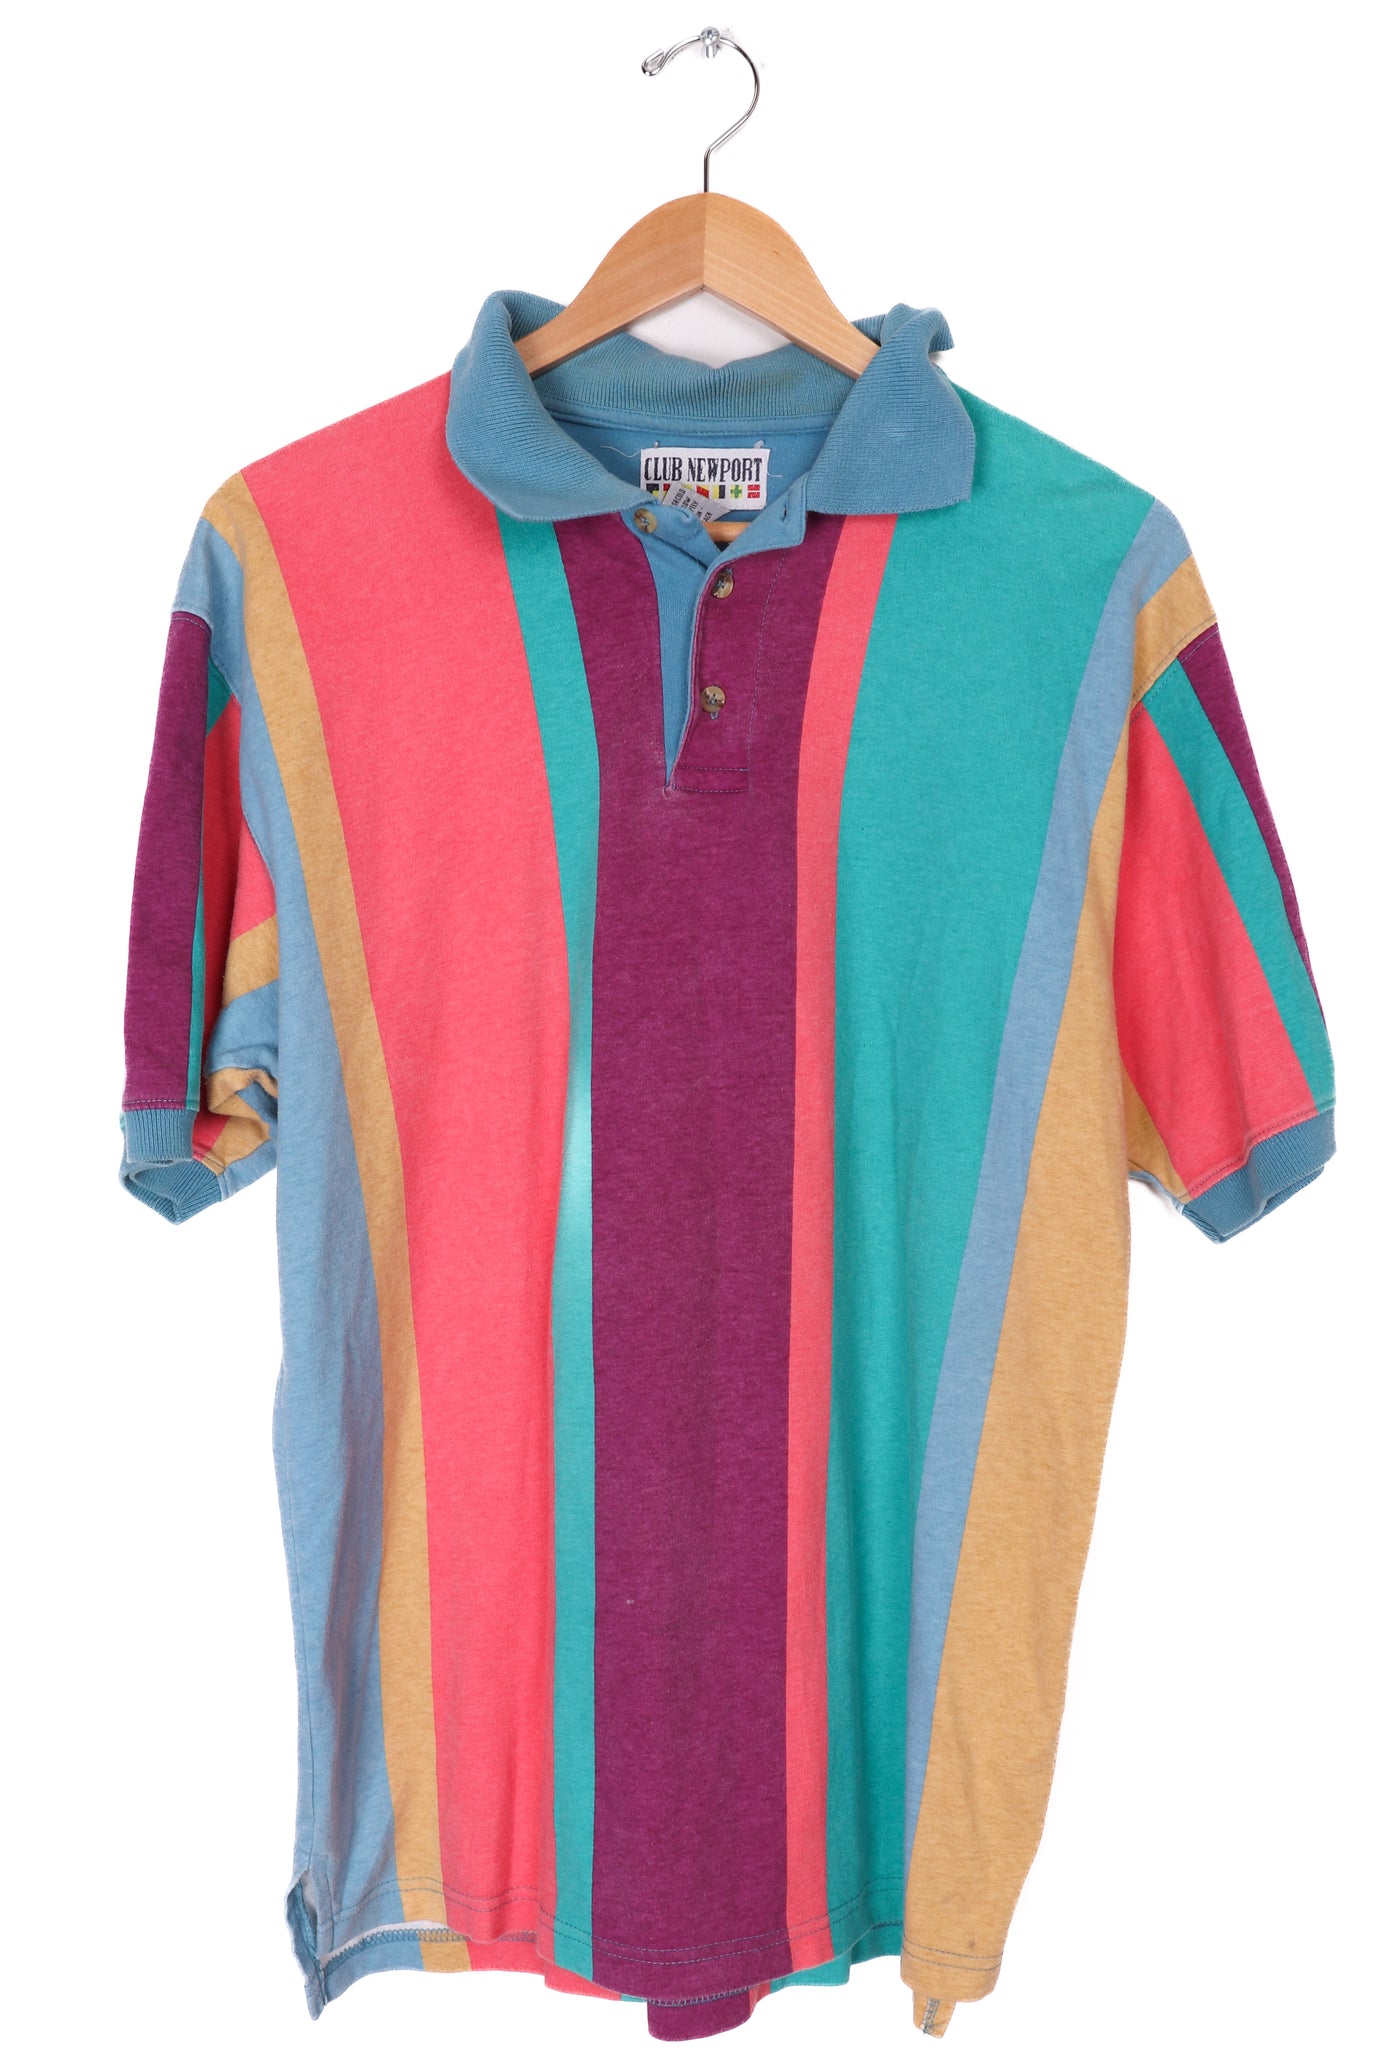 90s Club New Port Colorful Striped Collared Shirt